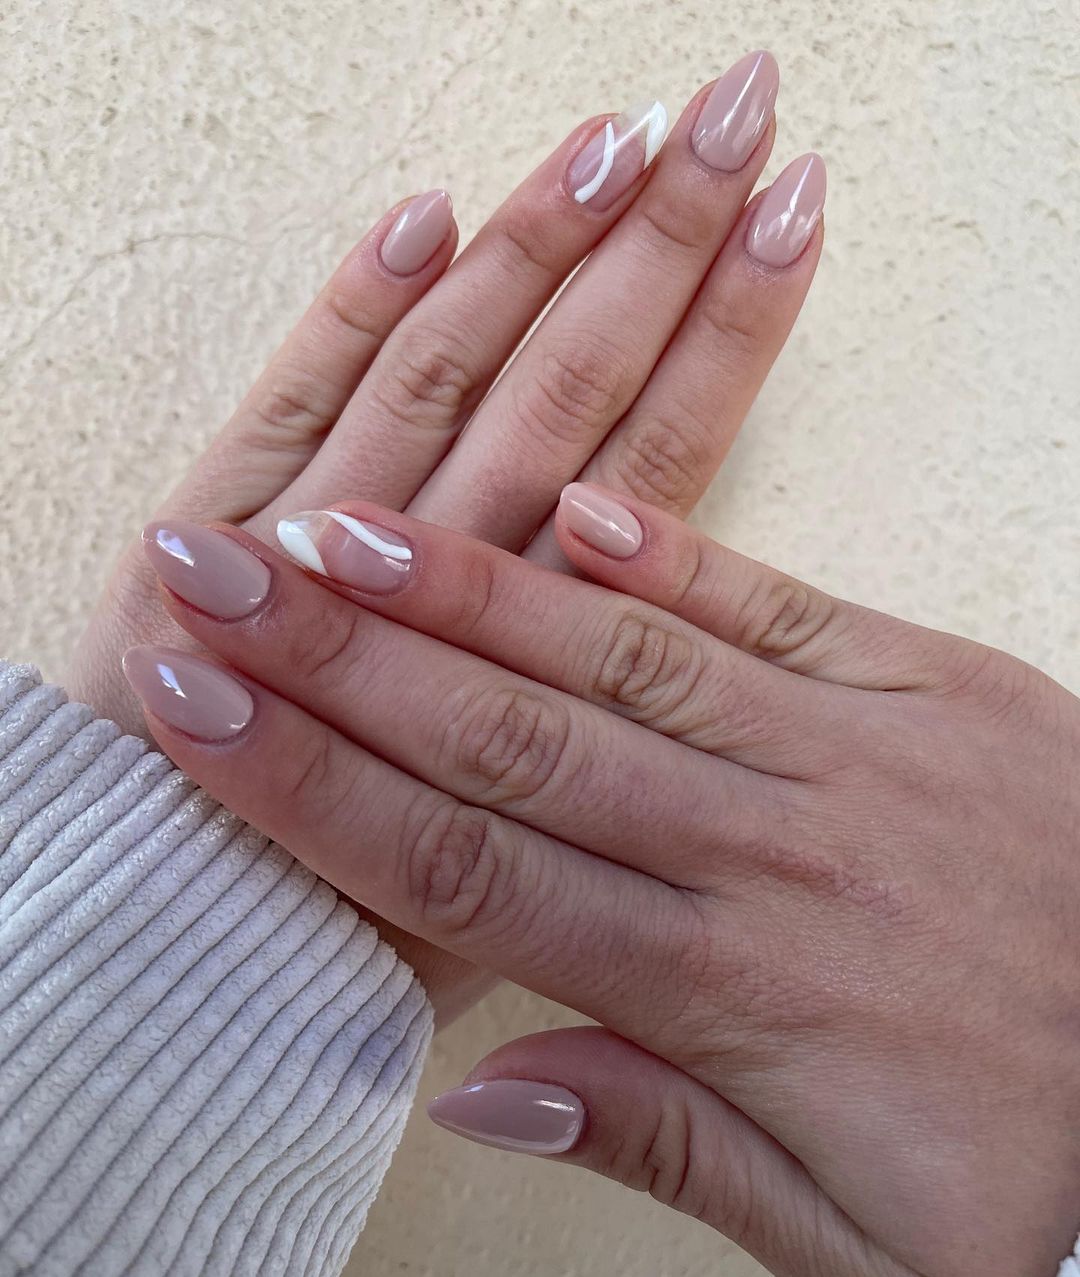 Flattering and wearable nude oval nail design